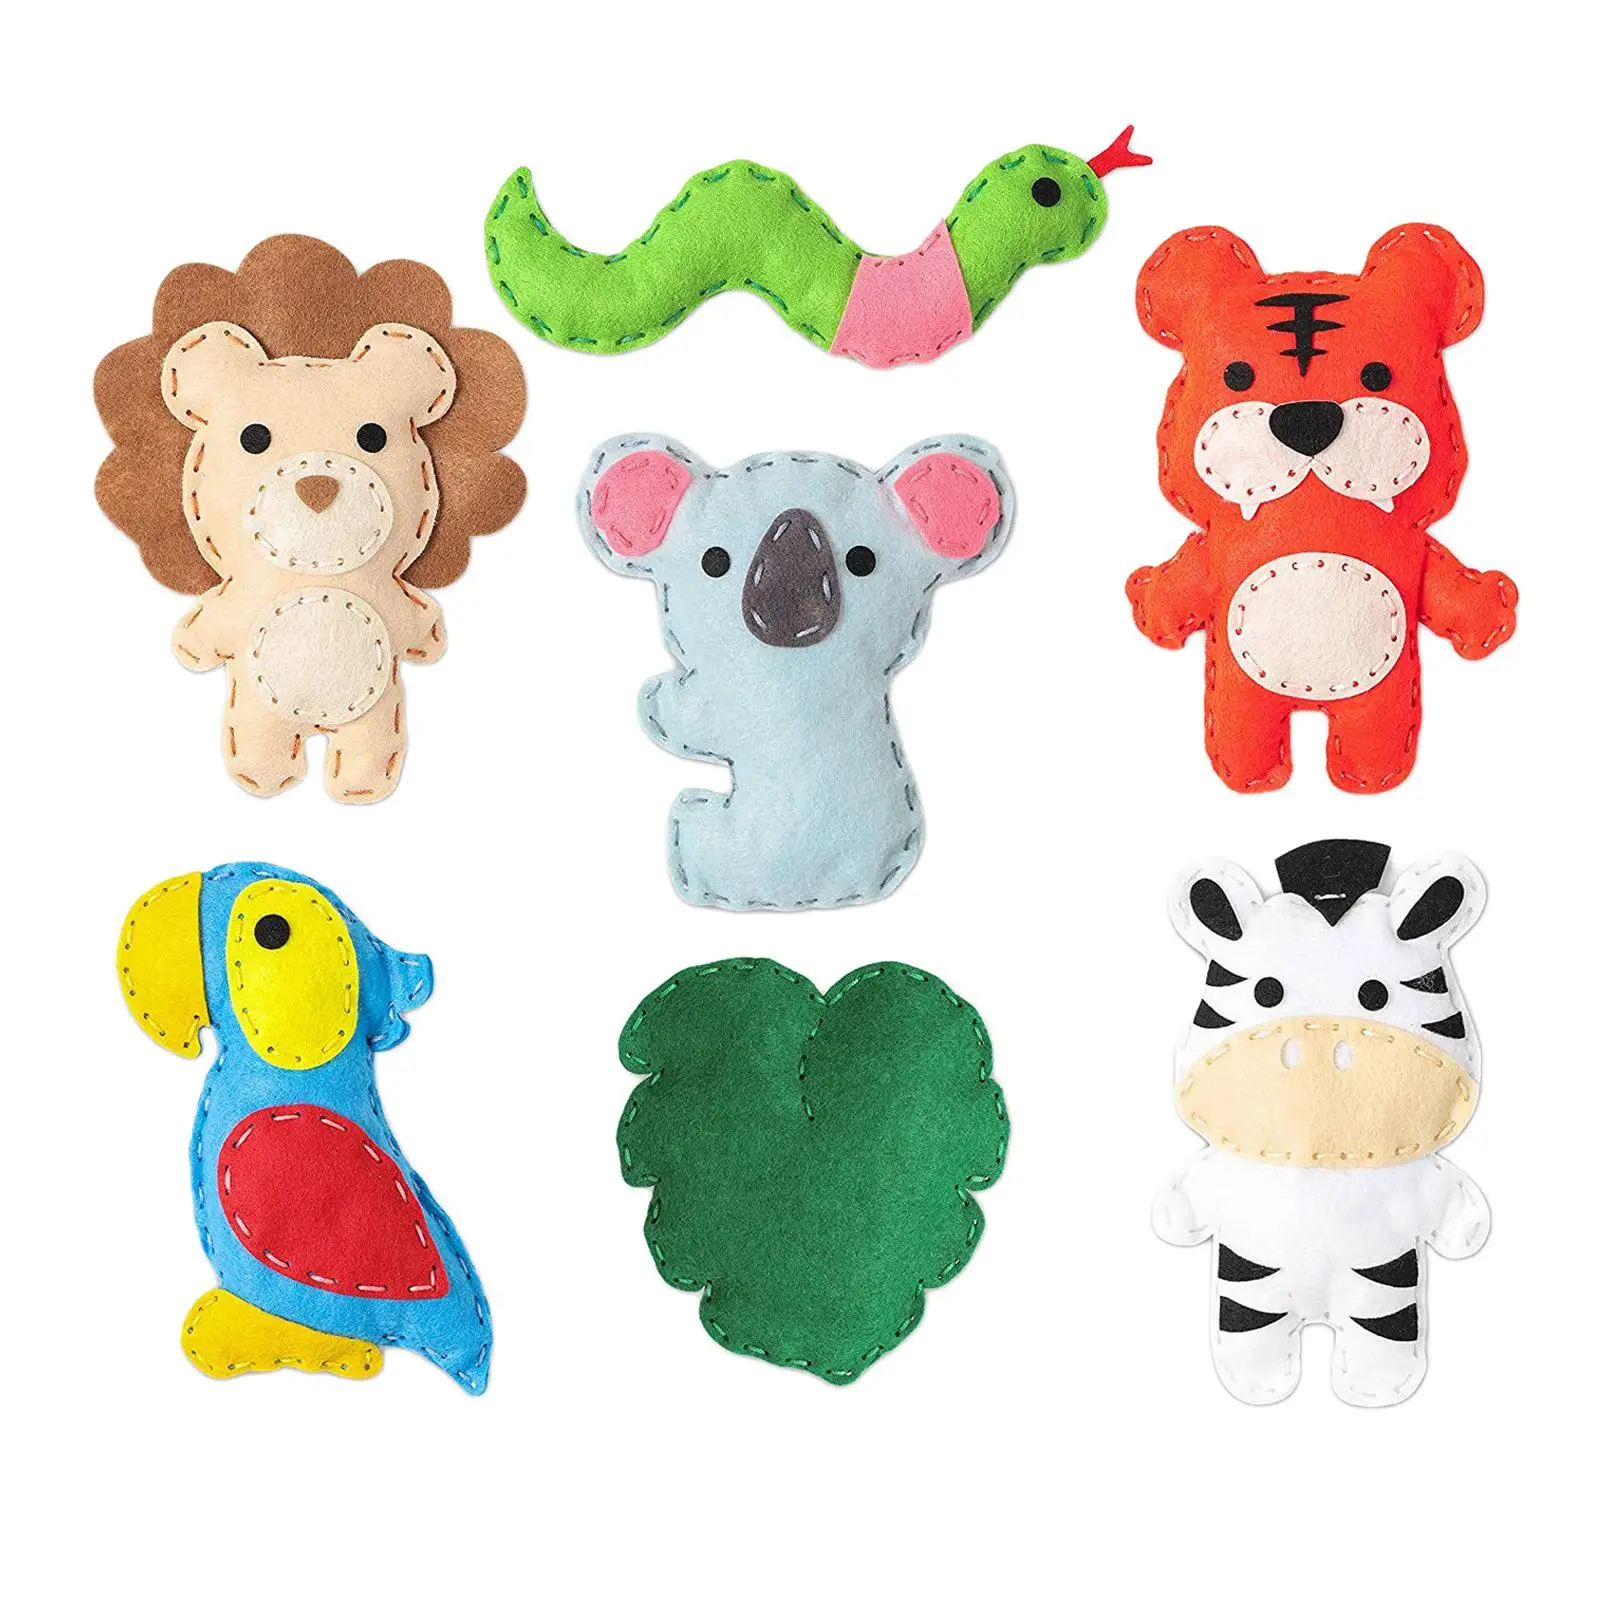 Animals Sewing Craft Kit 7 Years Old Felt DIY for Girls and Boys Craft Gift